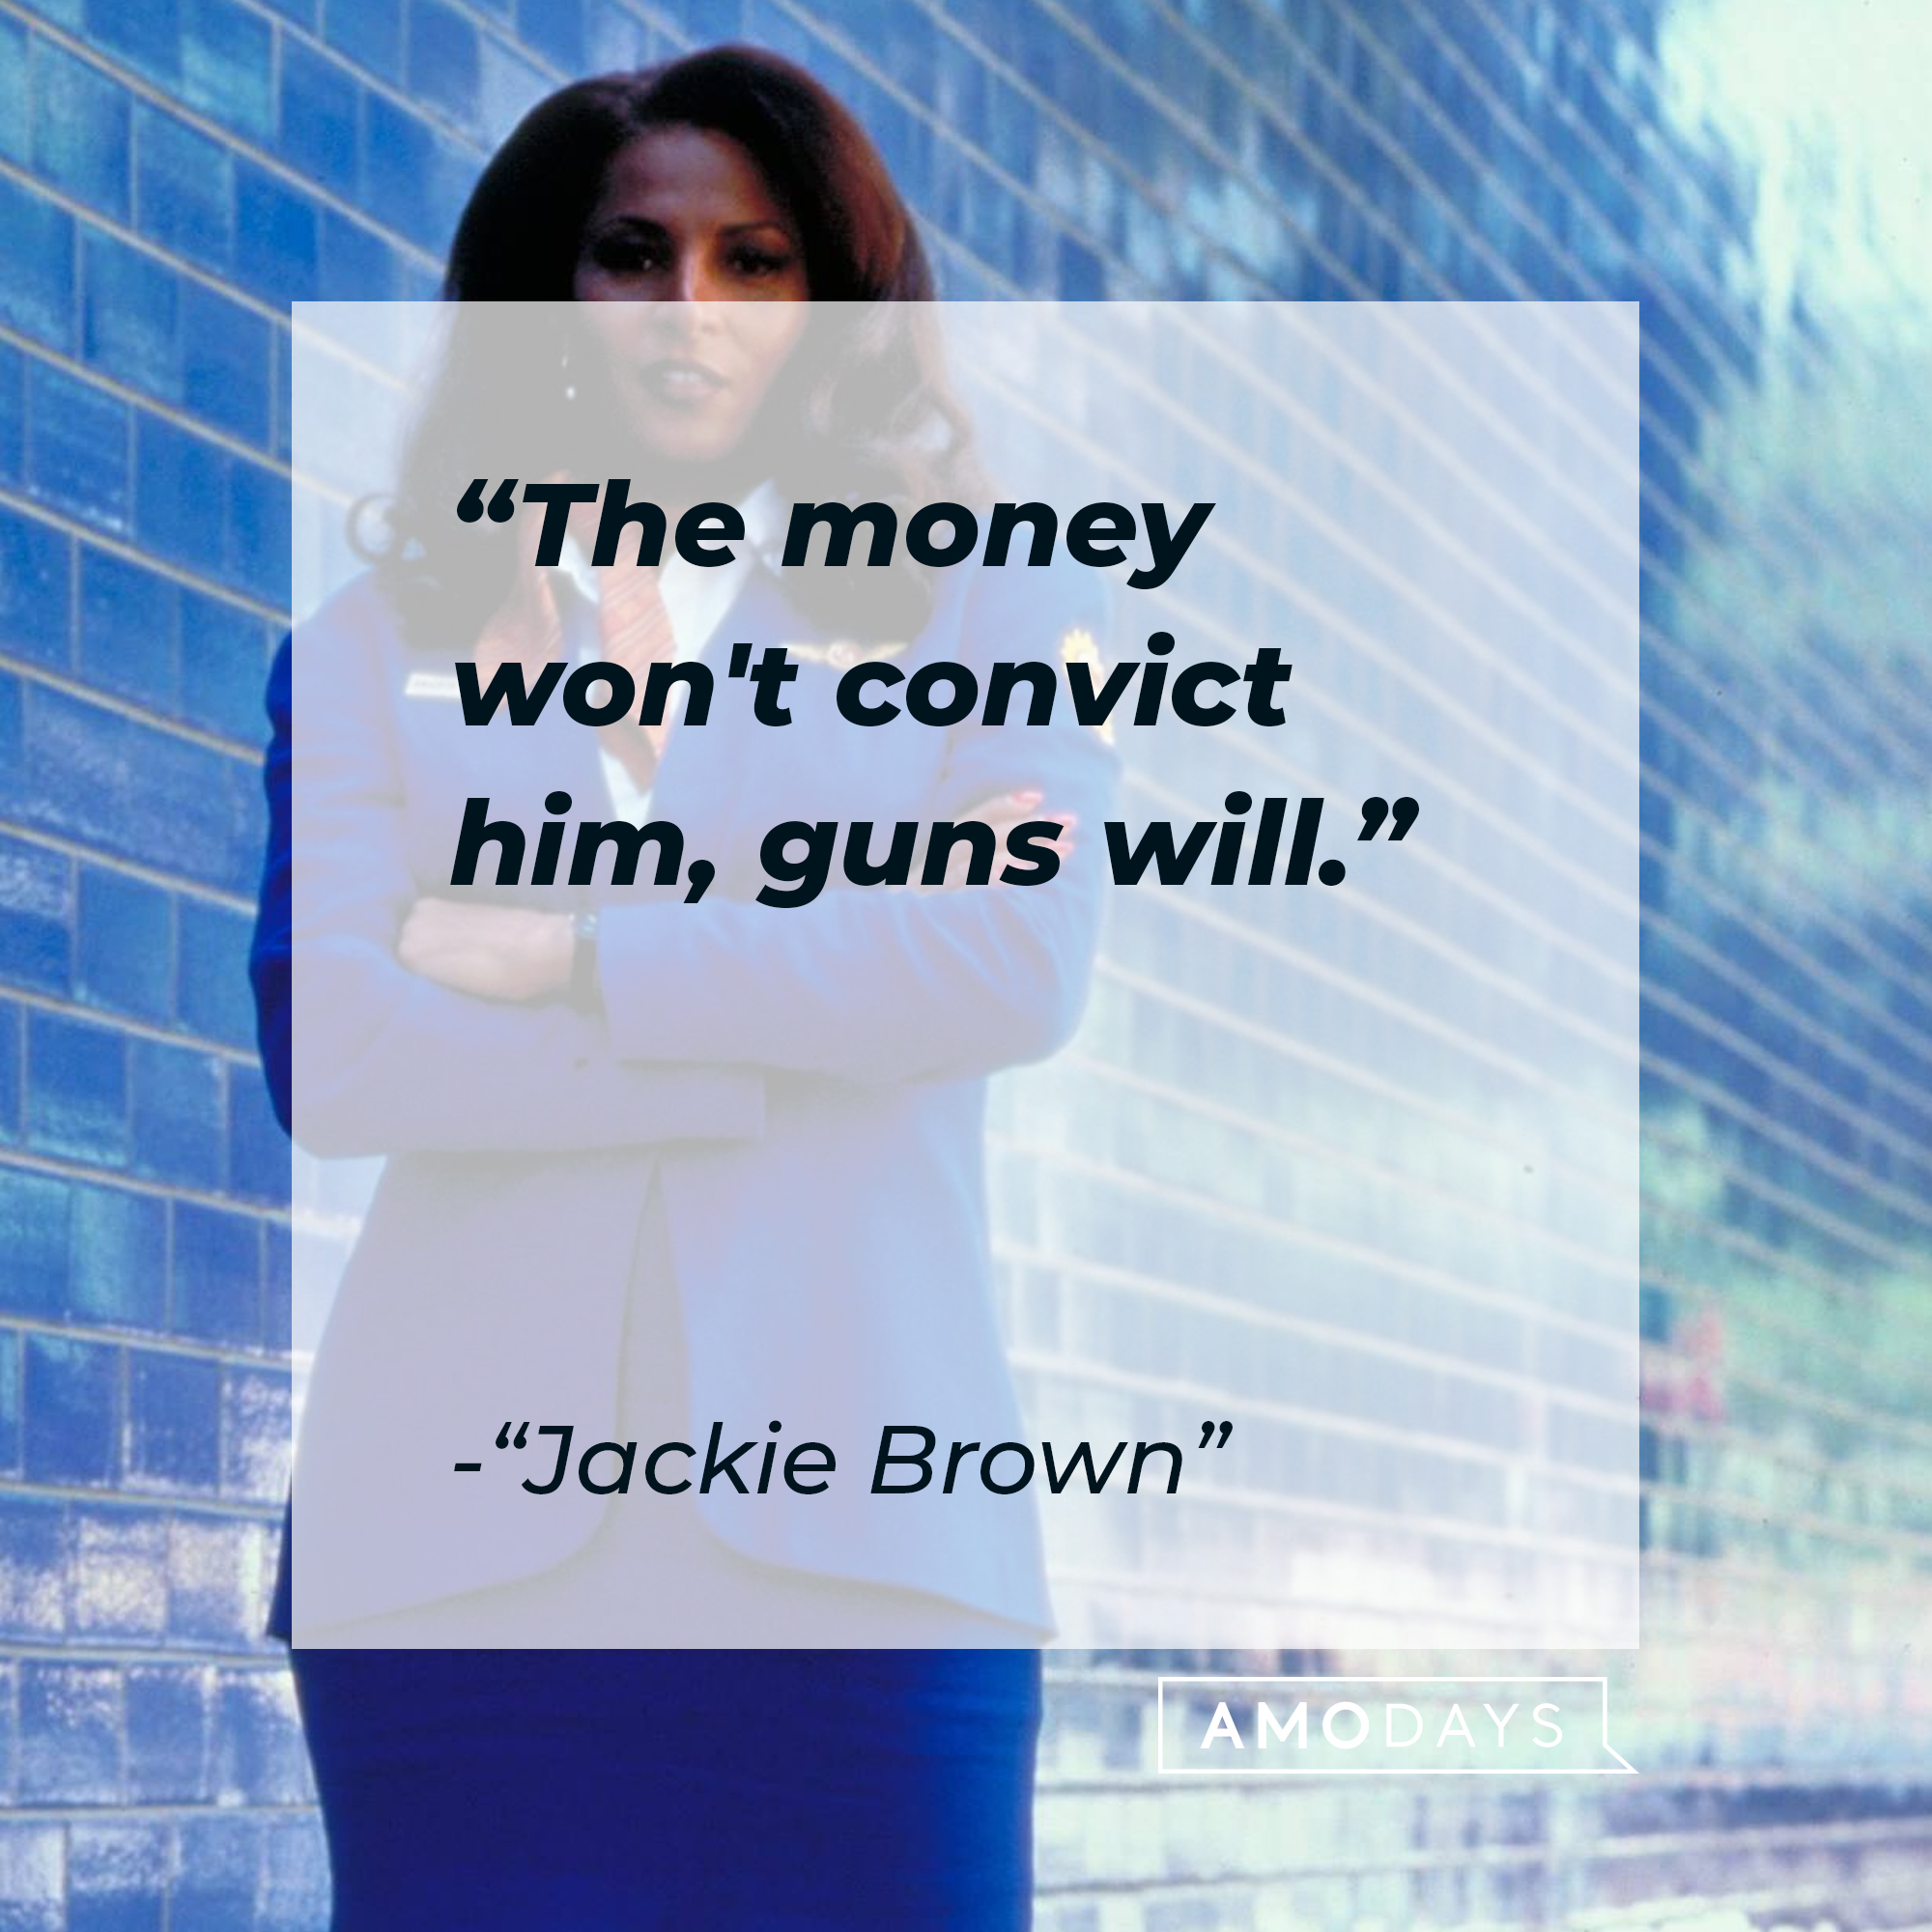 Jackie Brown's quote: "The money won't convict him, guns will." | Source: Facebook/JackieBrownMovie